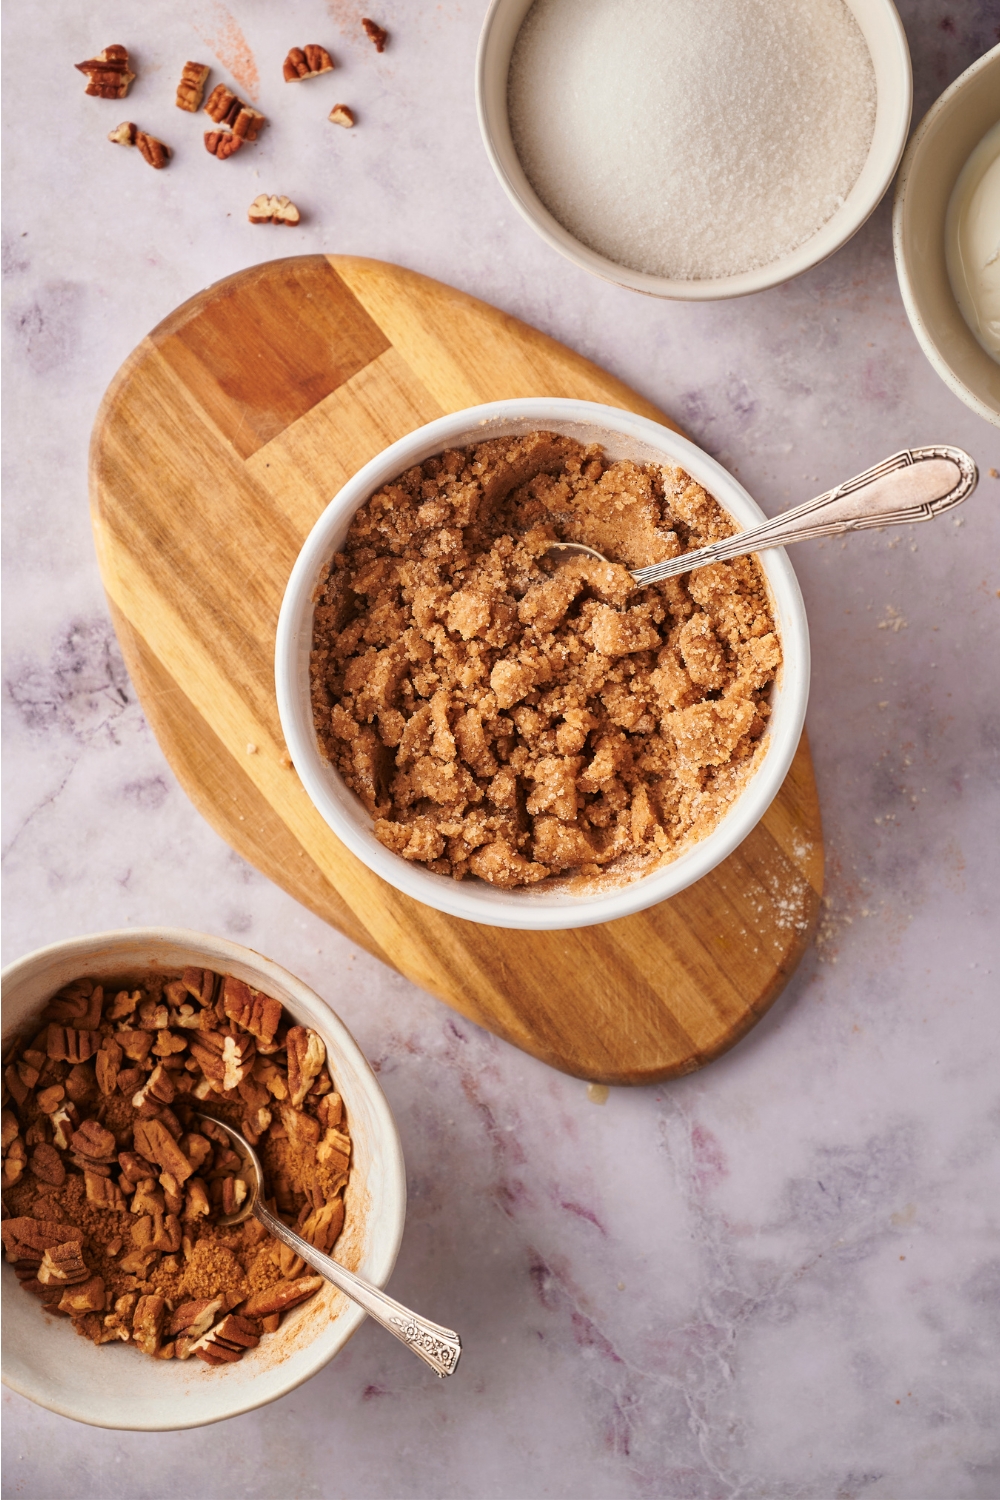 A brown sugar crumble mixture in a white bowl on top of a cutting board. In front of it is a pecan mixture in a white bowl.